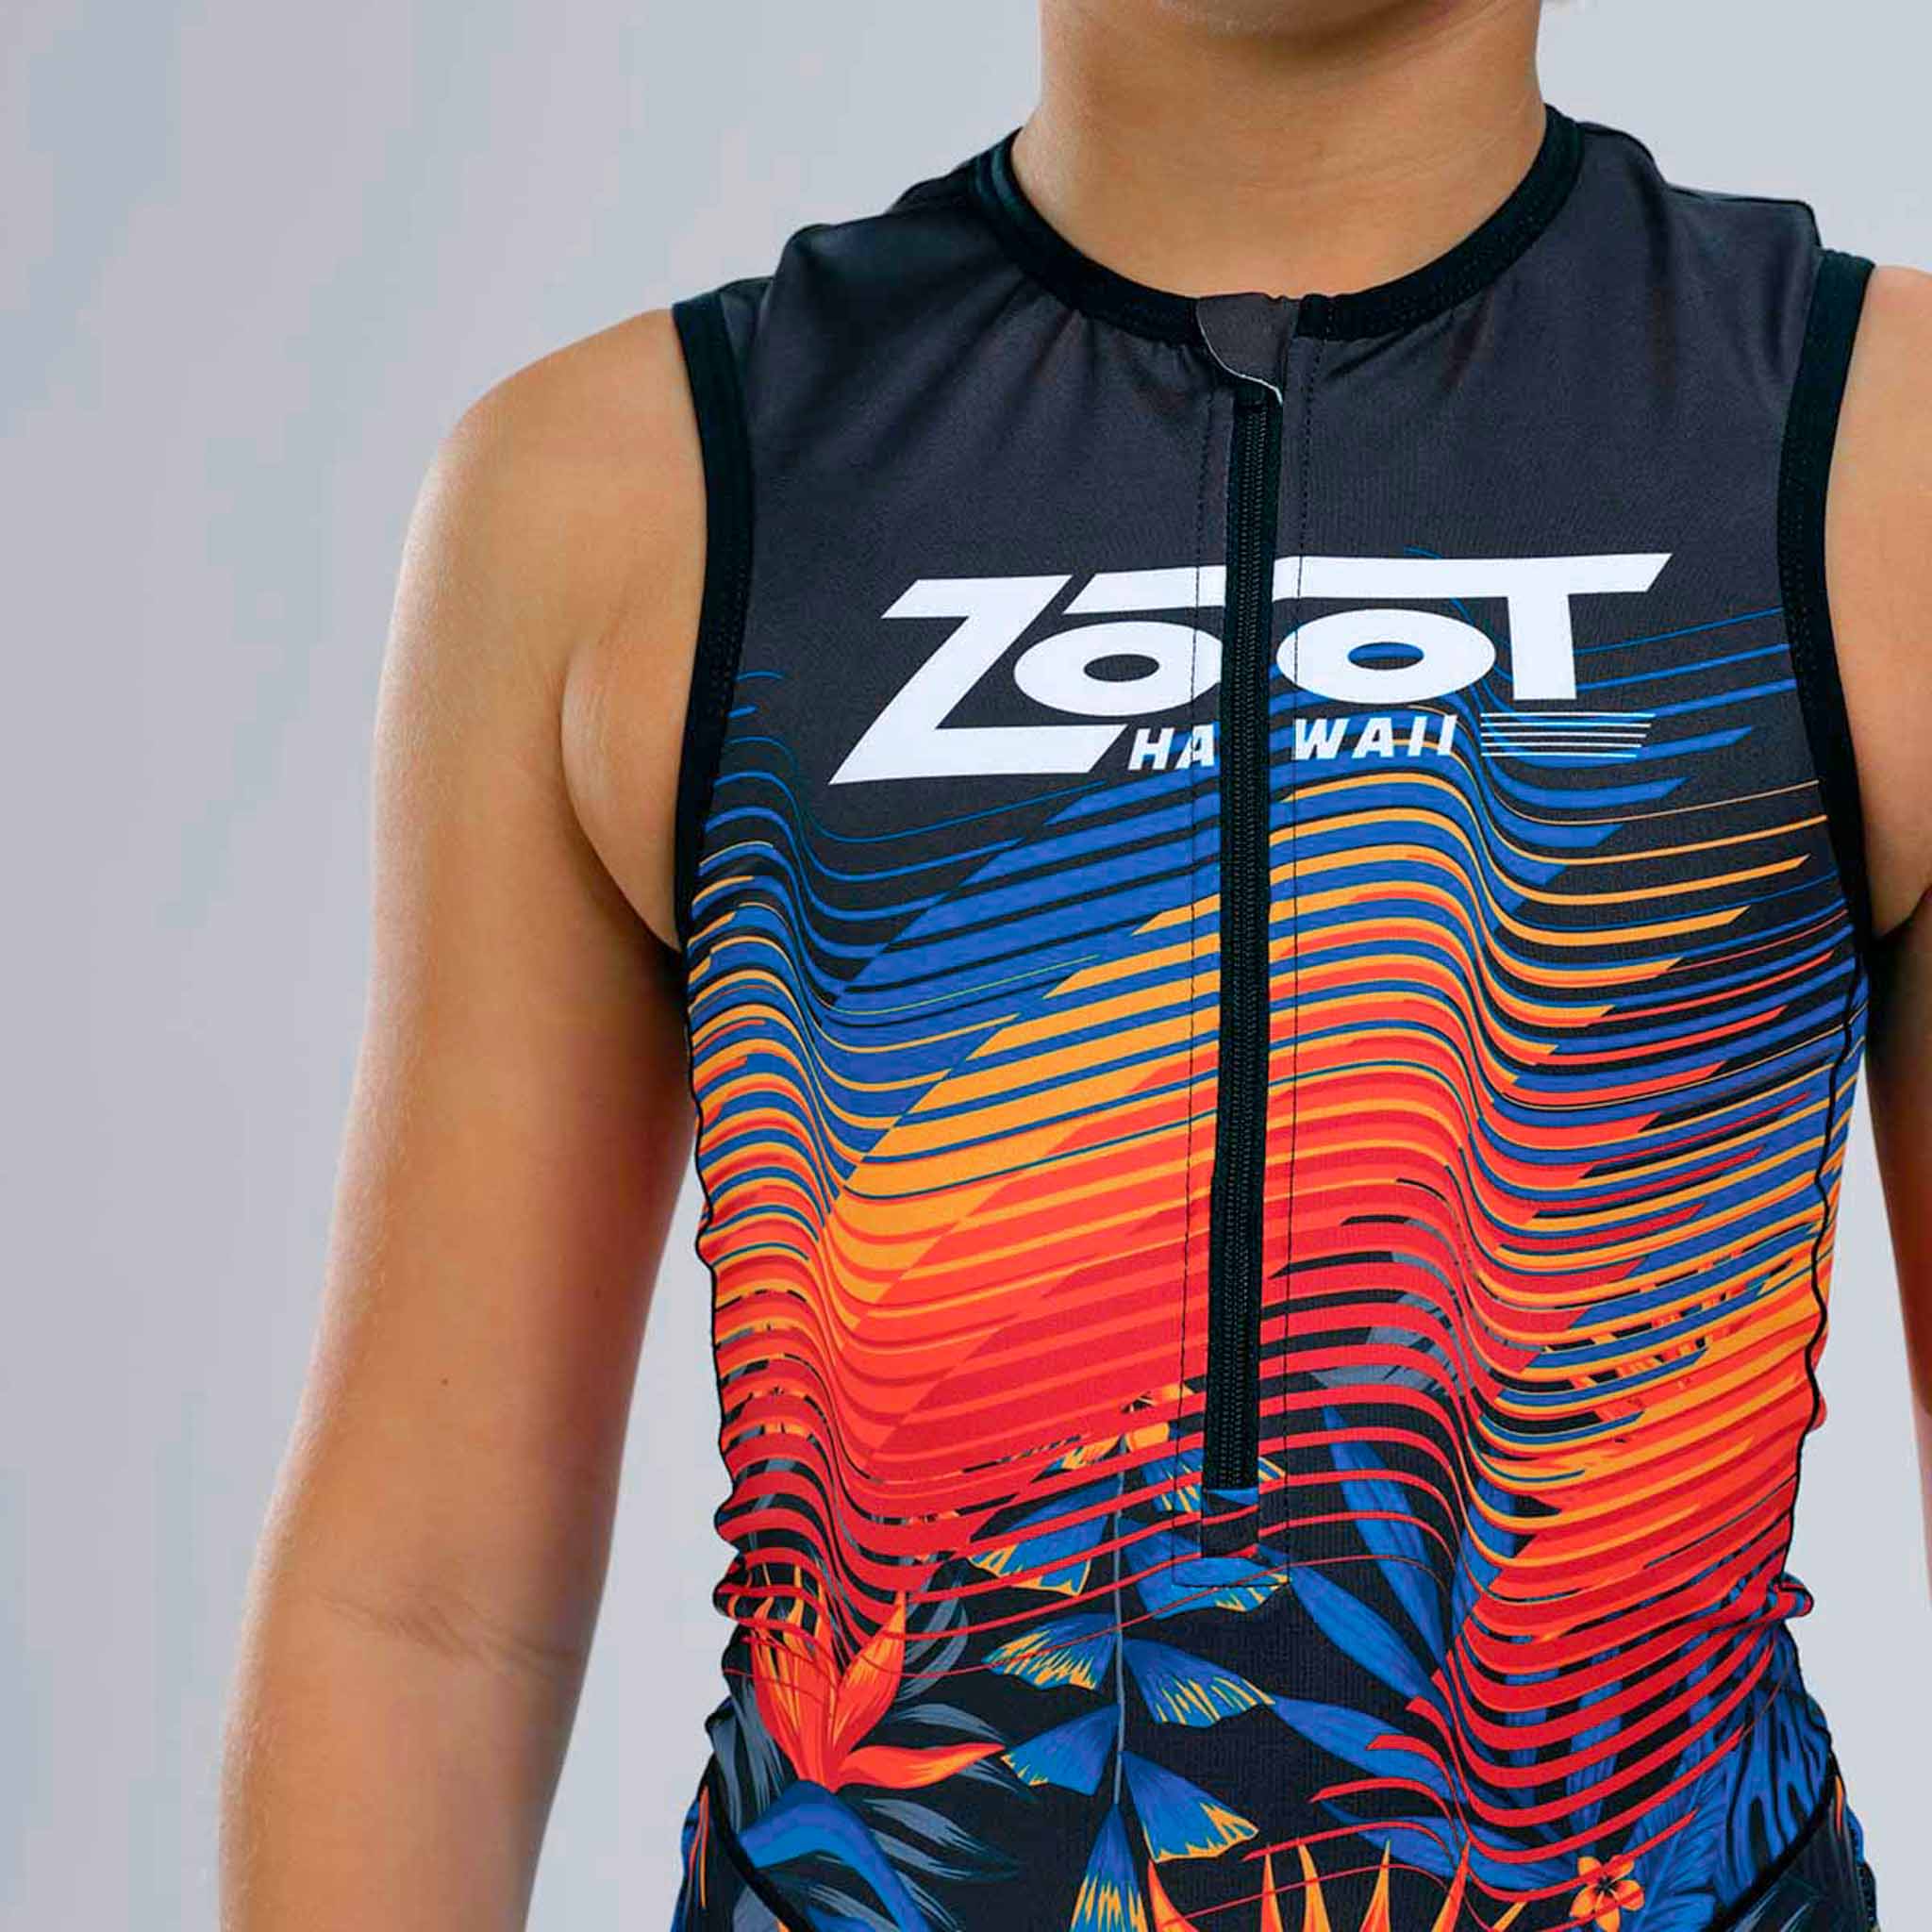 YOUTH LTD PROTEGE TRI RACESUIT - 40 YEARS